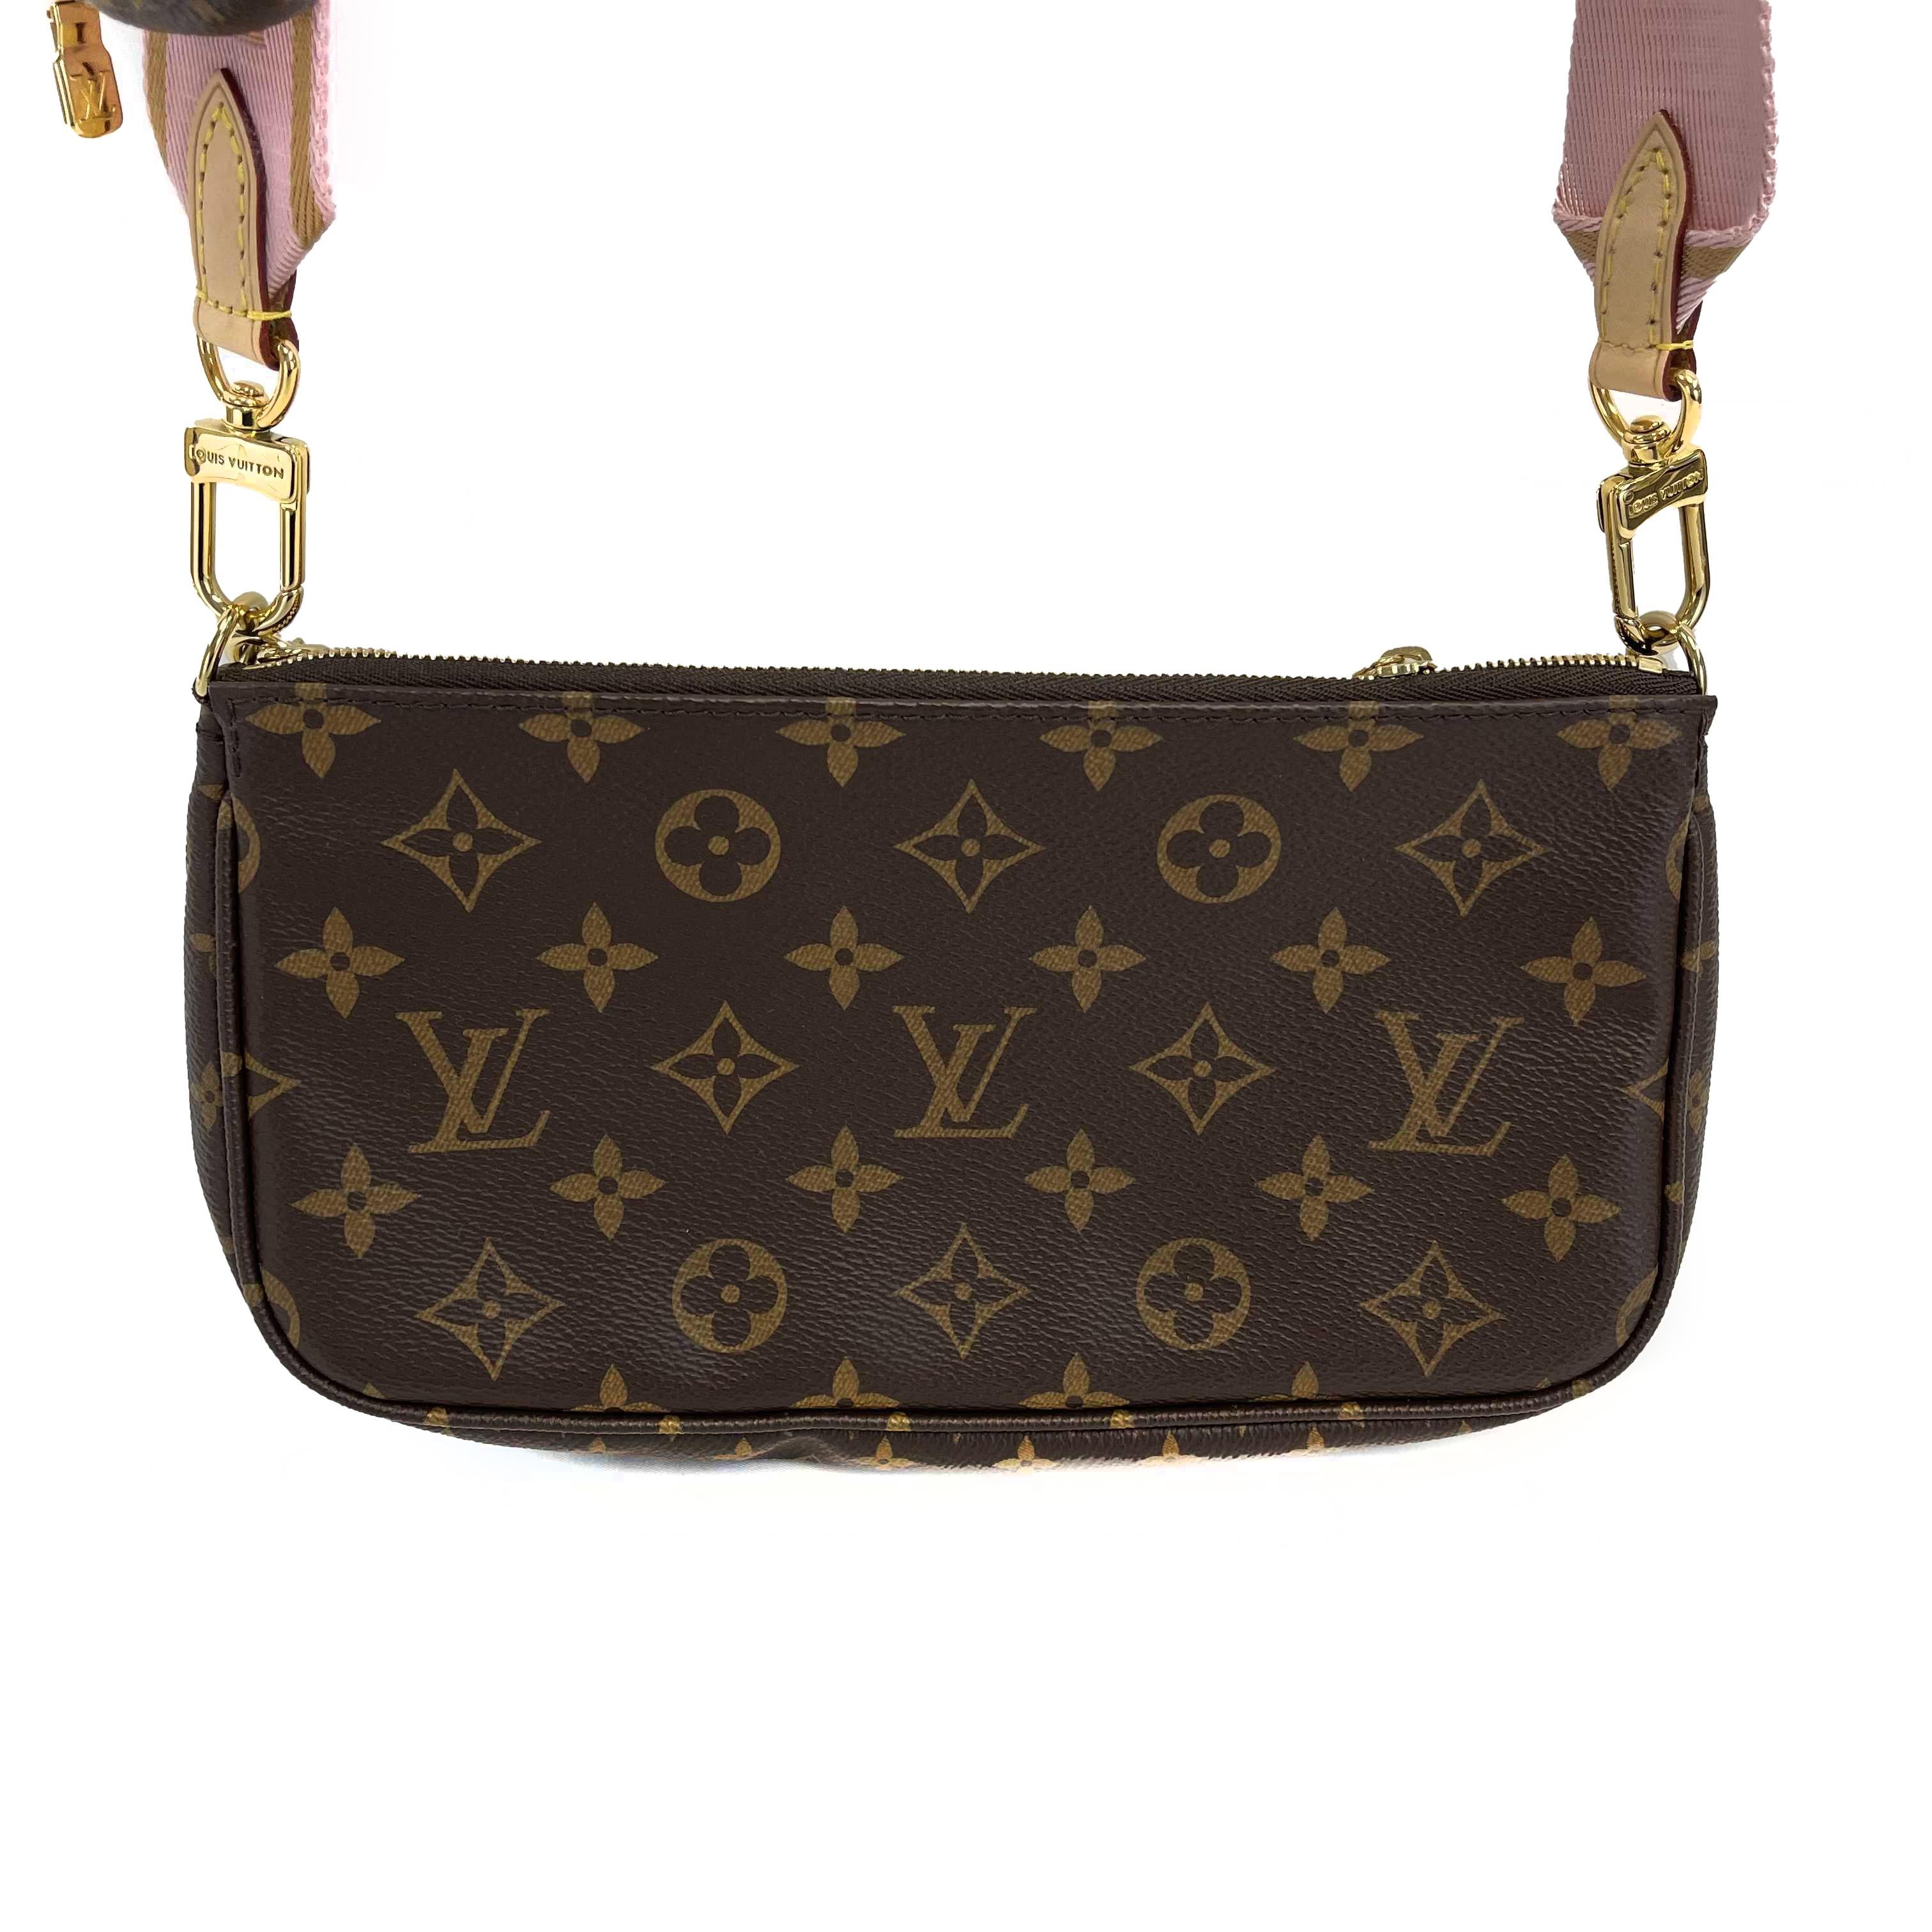 Louis Vuitton - New w/o Tags - Multi Pochette Accessories in Light Pink - Brown, Light Pink - Handbag

Description

The Multi Pochette Accessoires is a hybrid cross-body bag with multiple pockets and compartments that brings together a Pochette